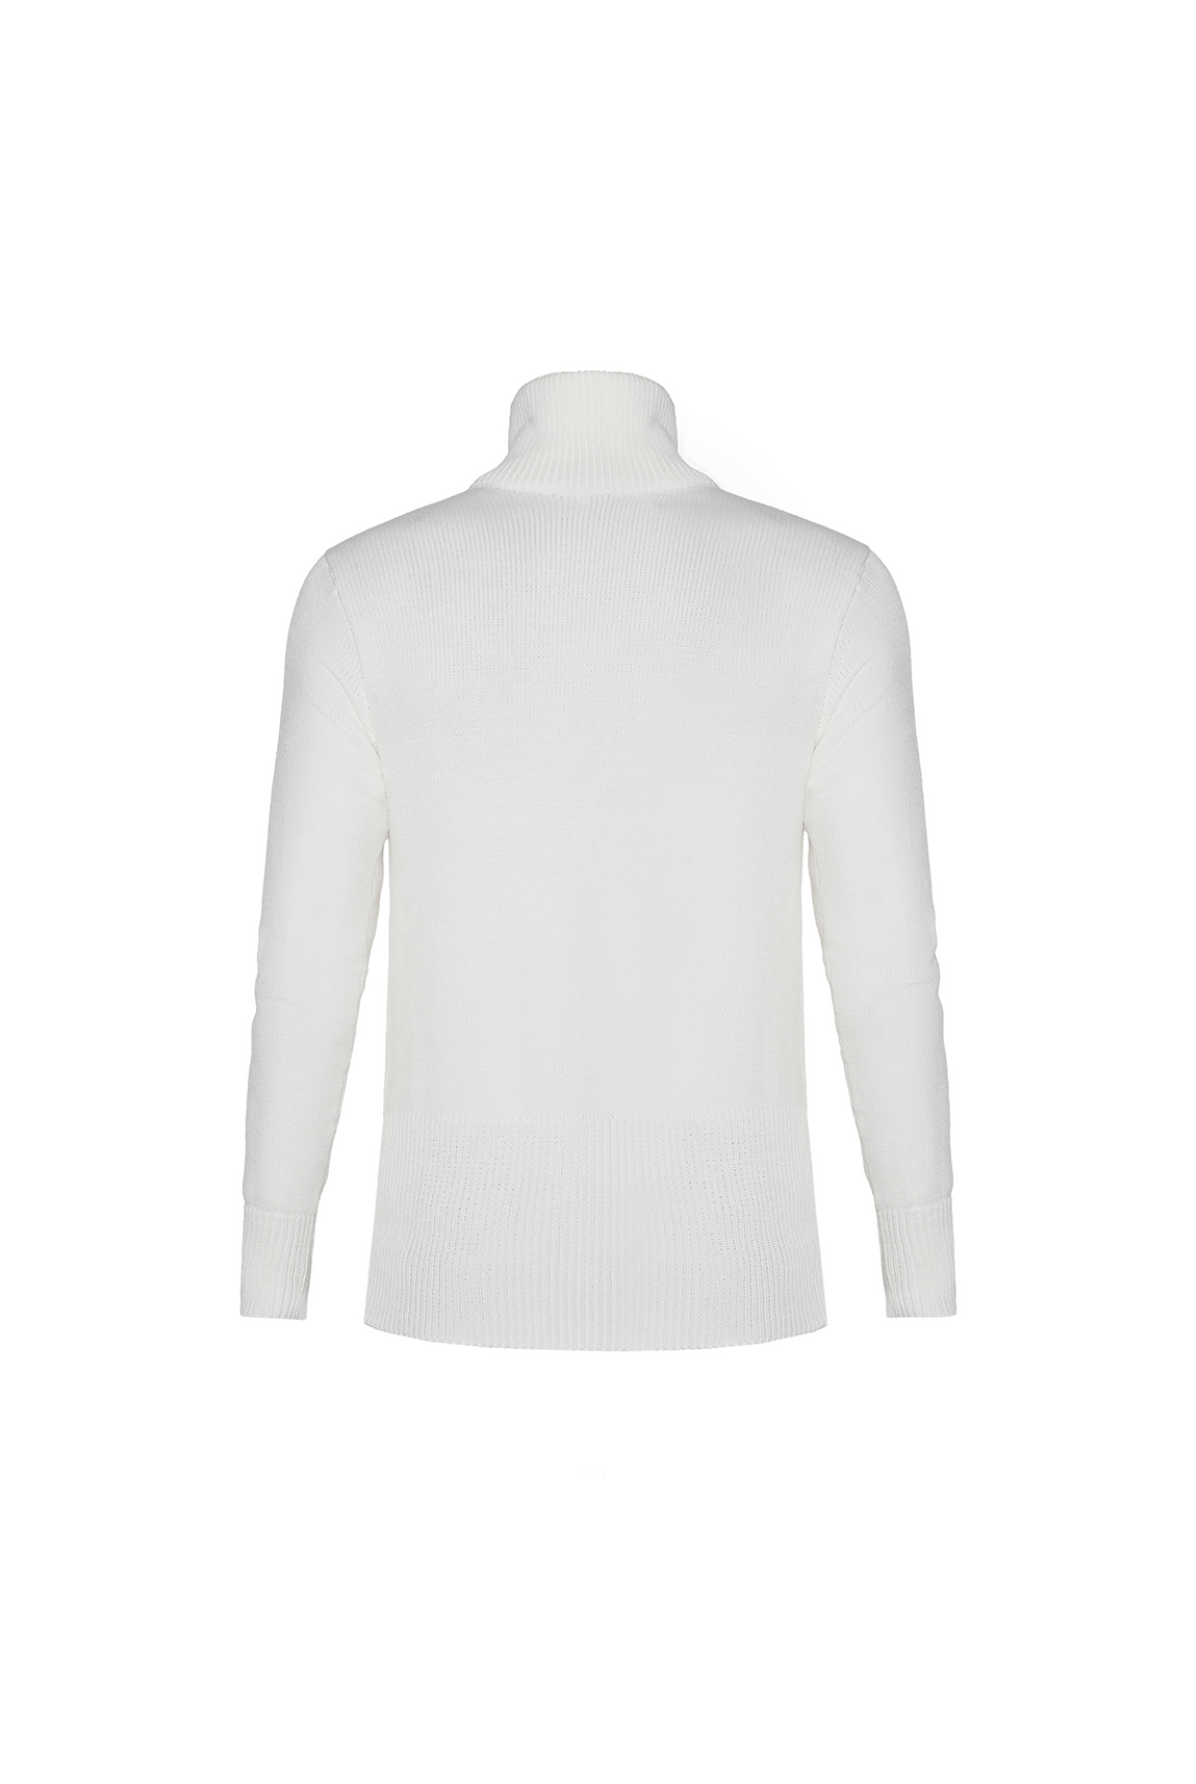 WHITE KNITTED CARDIGAN - SITUATIONIST